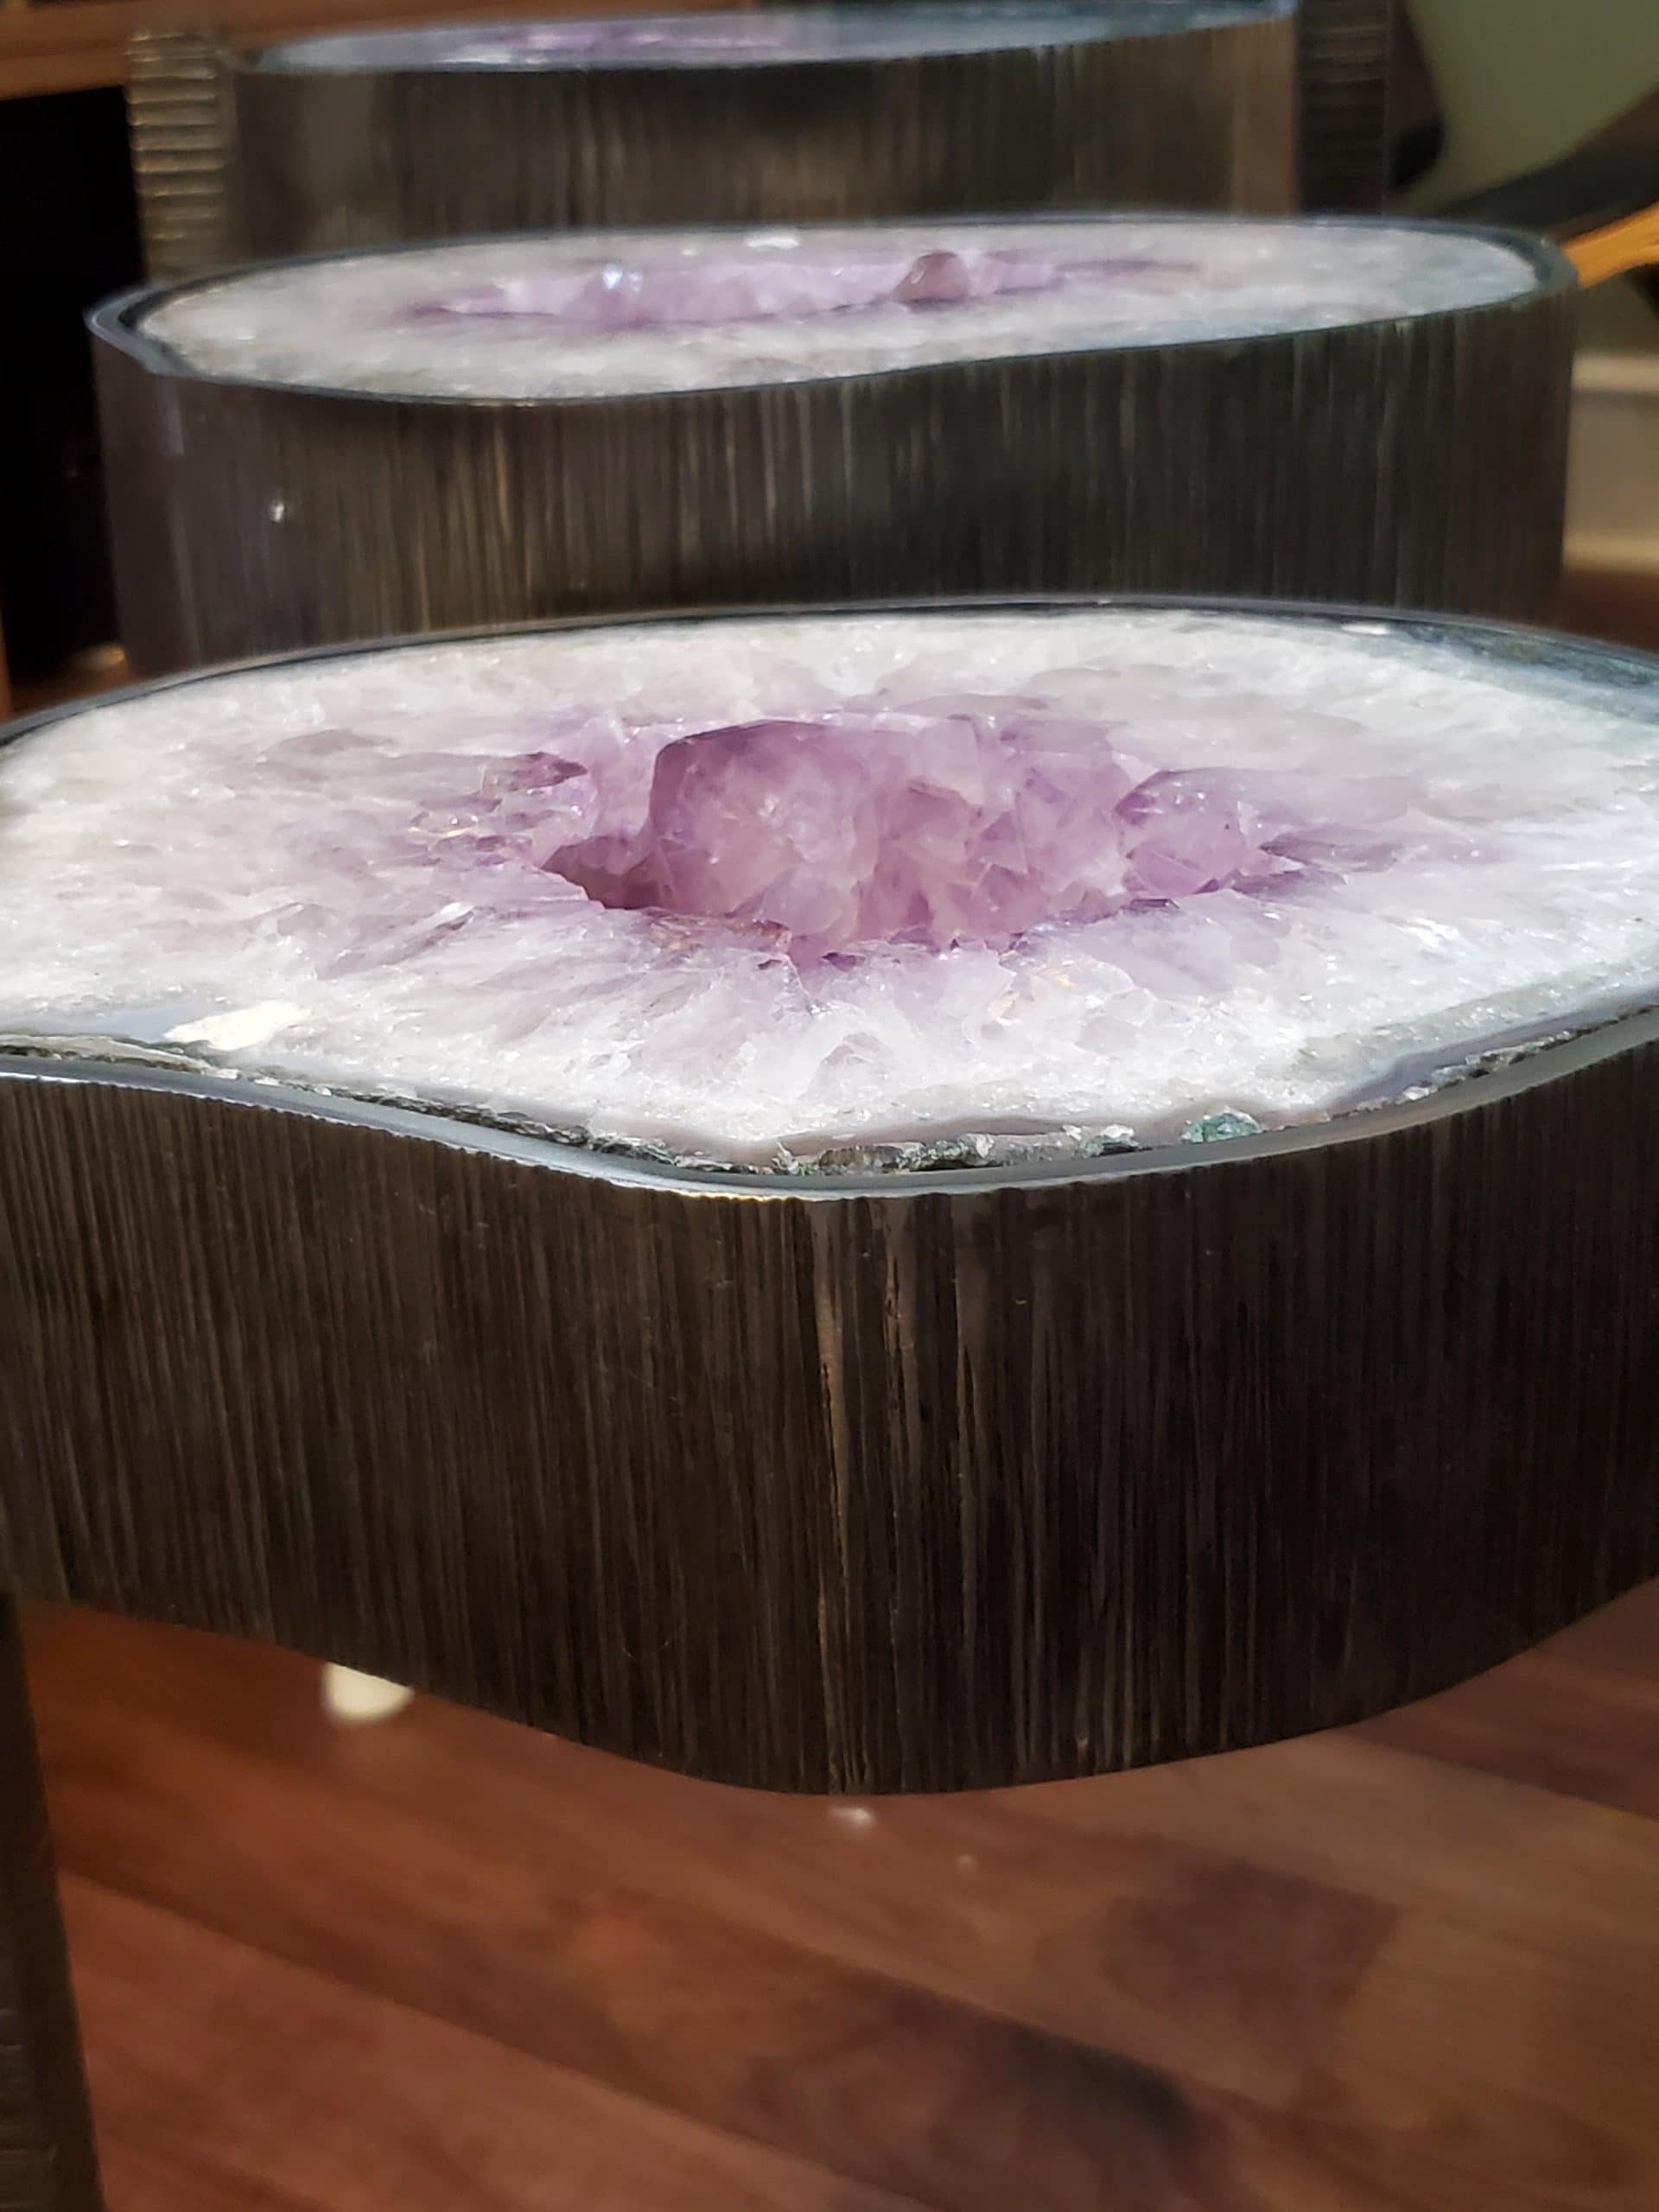 WATERFALL TABLE-3 TIER-SMALLER AMETHYST SLICES/DRUZY HOLES